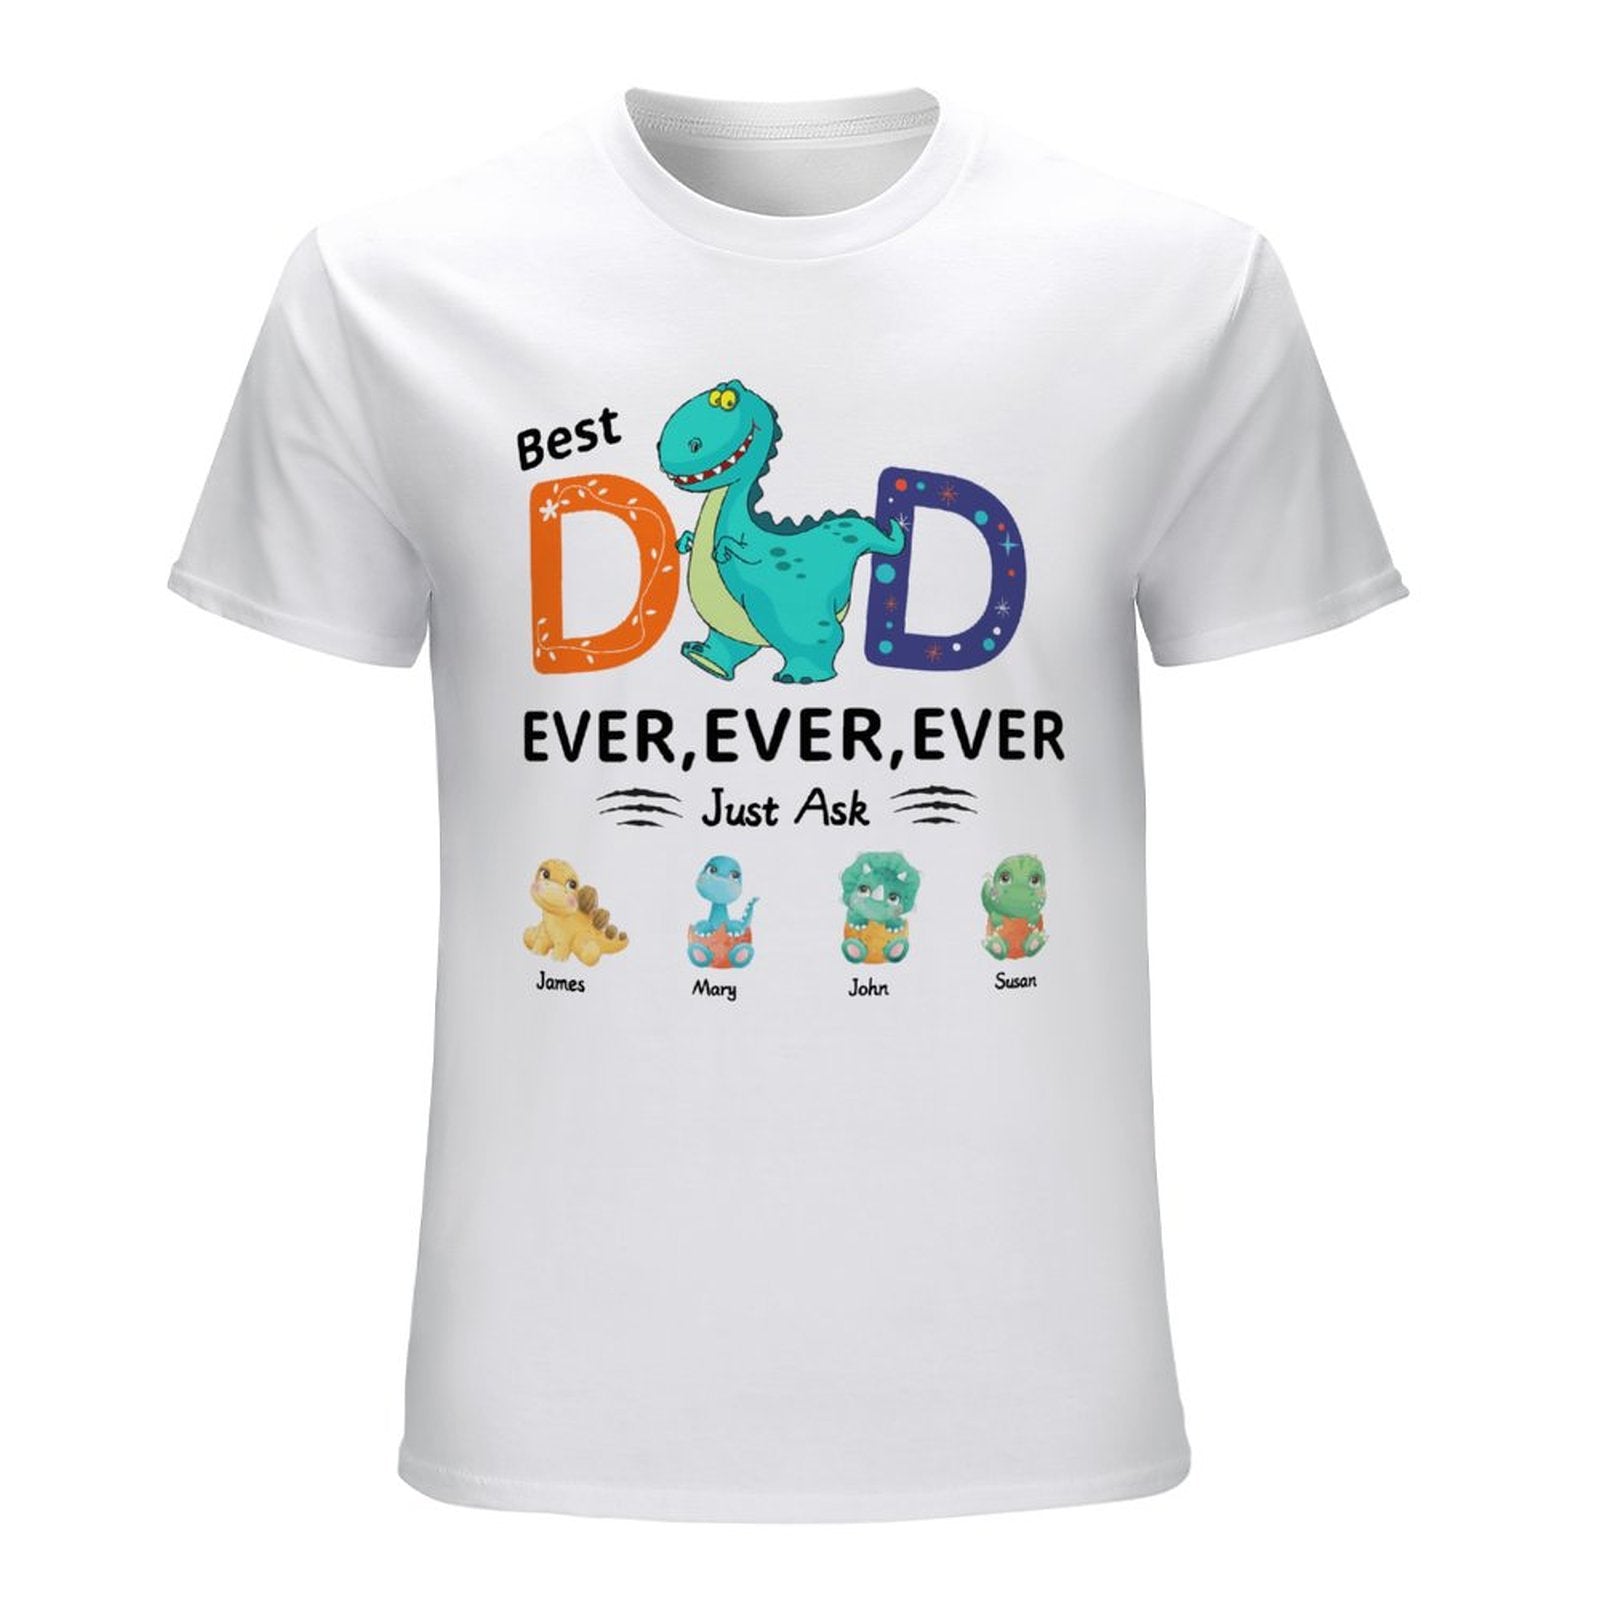 Father's Day Gift-Custom kids Name Shirt, Personalized Custom Cartoon T-Shirt As Father's Day Birthday Gifts For Men Dad - colorfulcustom